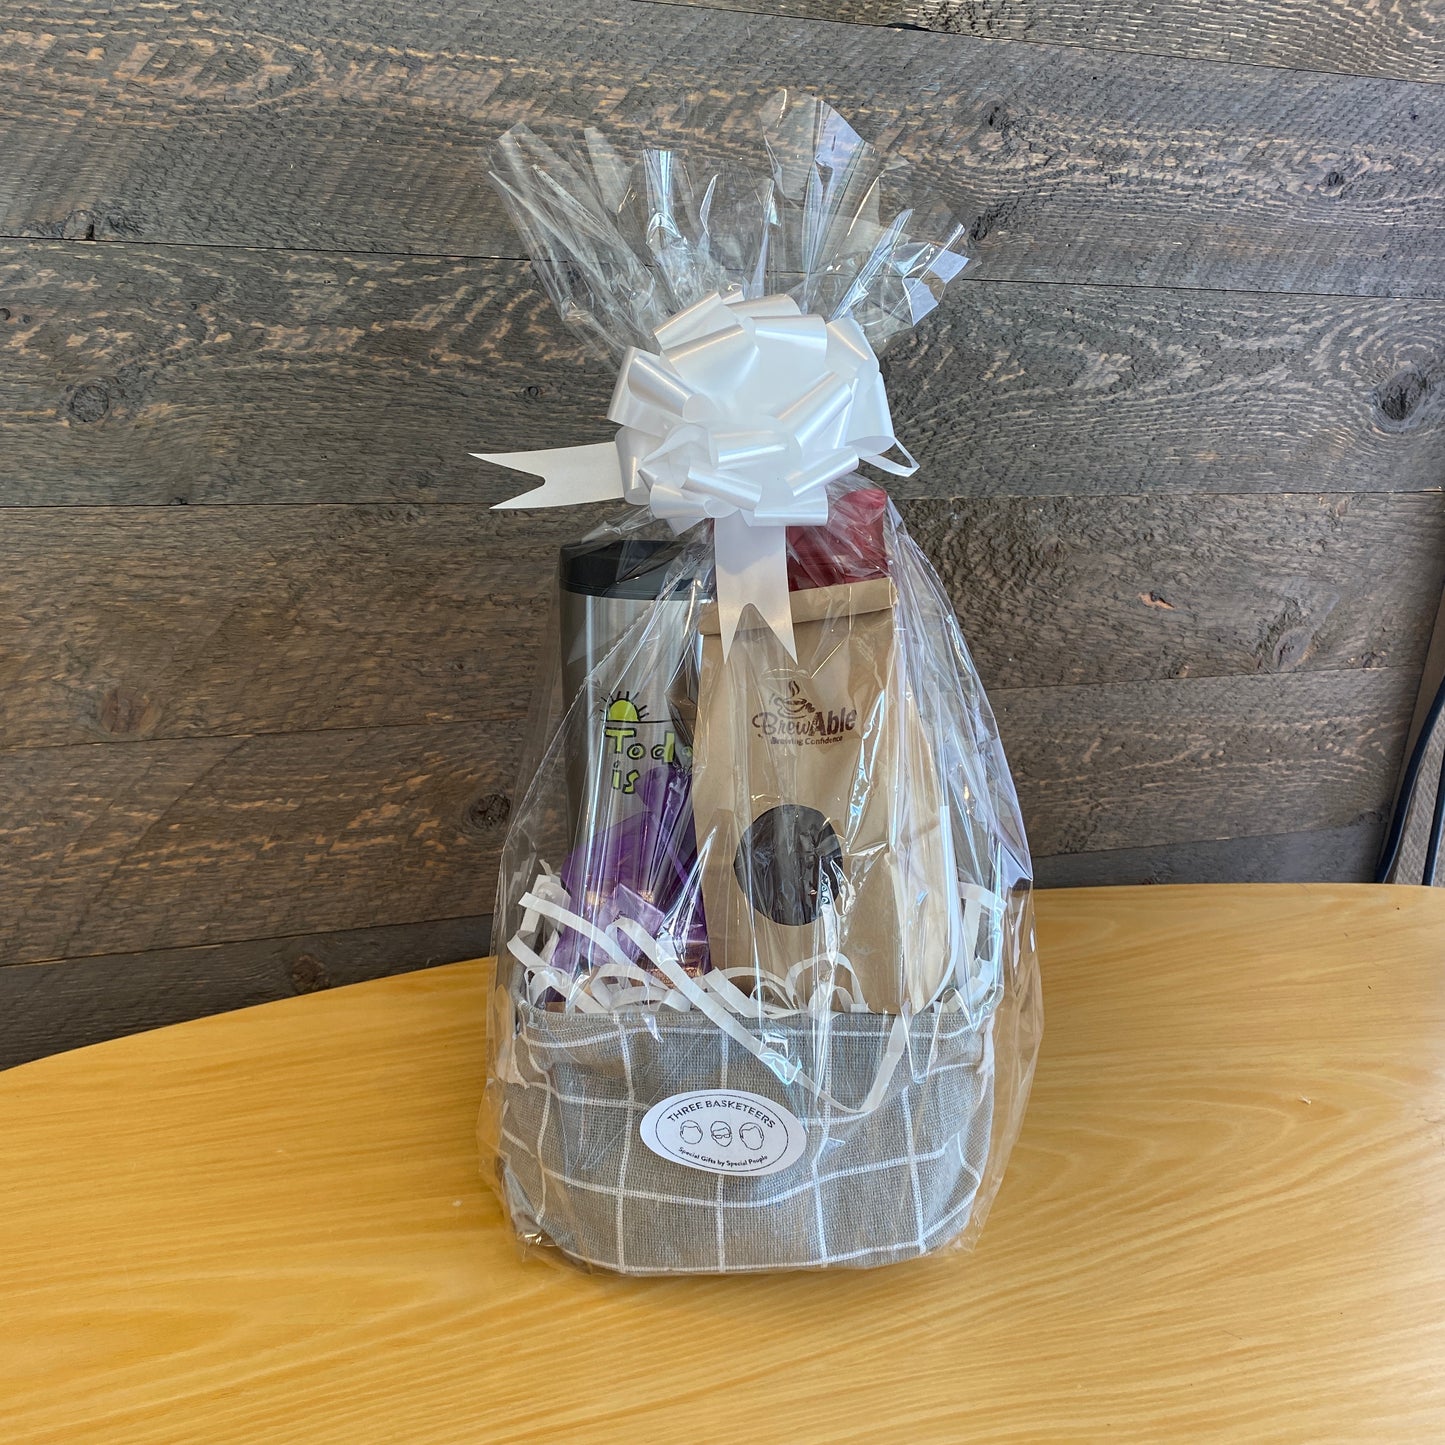 This handmade gift basket includes a choice of a ceramic mug or a stainless steel tumbler, gourmet coffee or hot cocoa mix, caramel popcorn and chocolates 